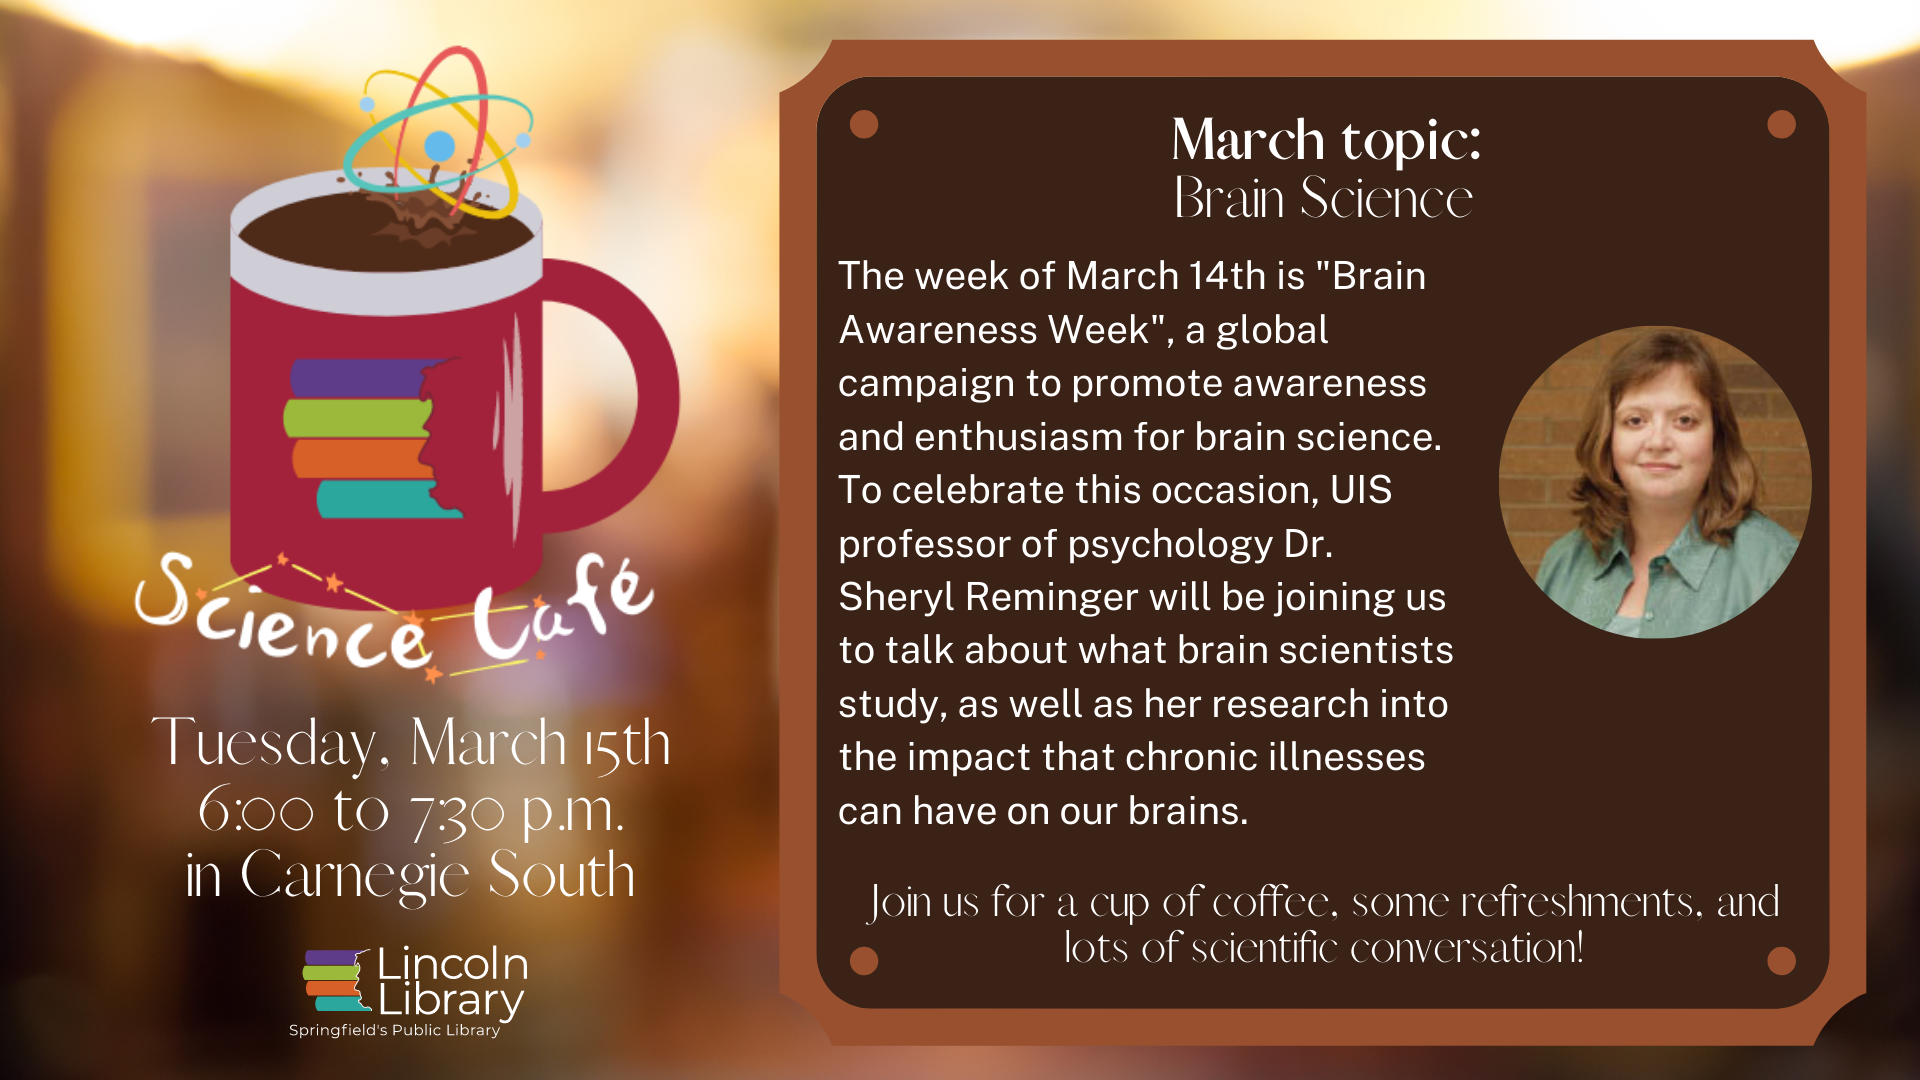 Program flyer for March 2022 Science Cafe, to be held on Tuesday, March 15th at 6:00 p.m. in the Carnegie South room